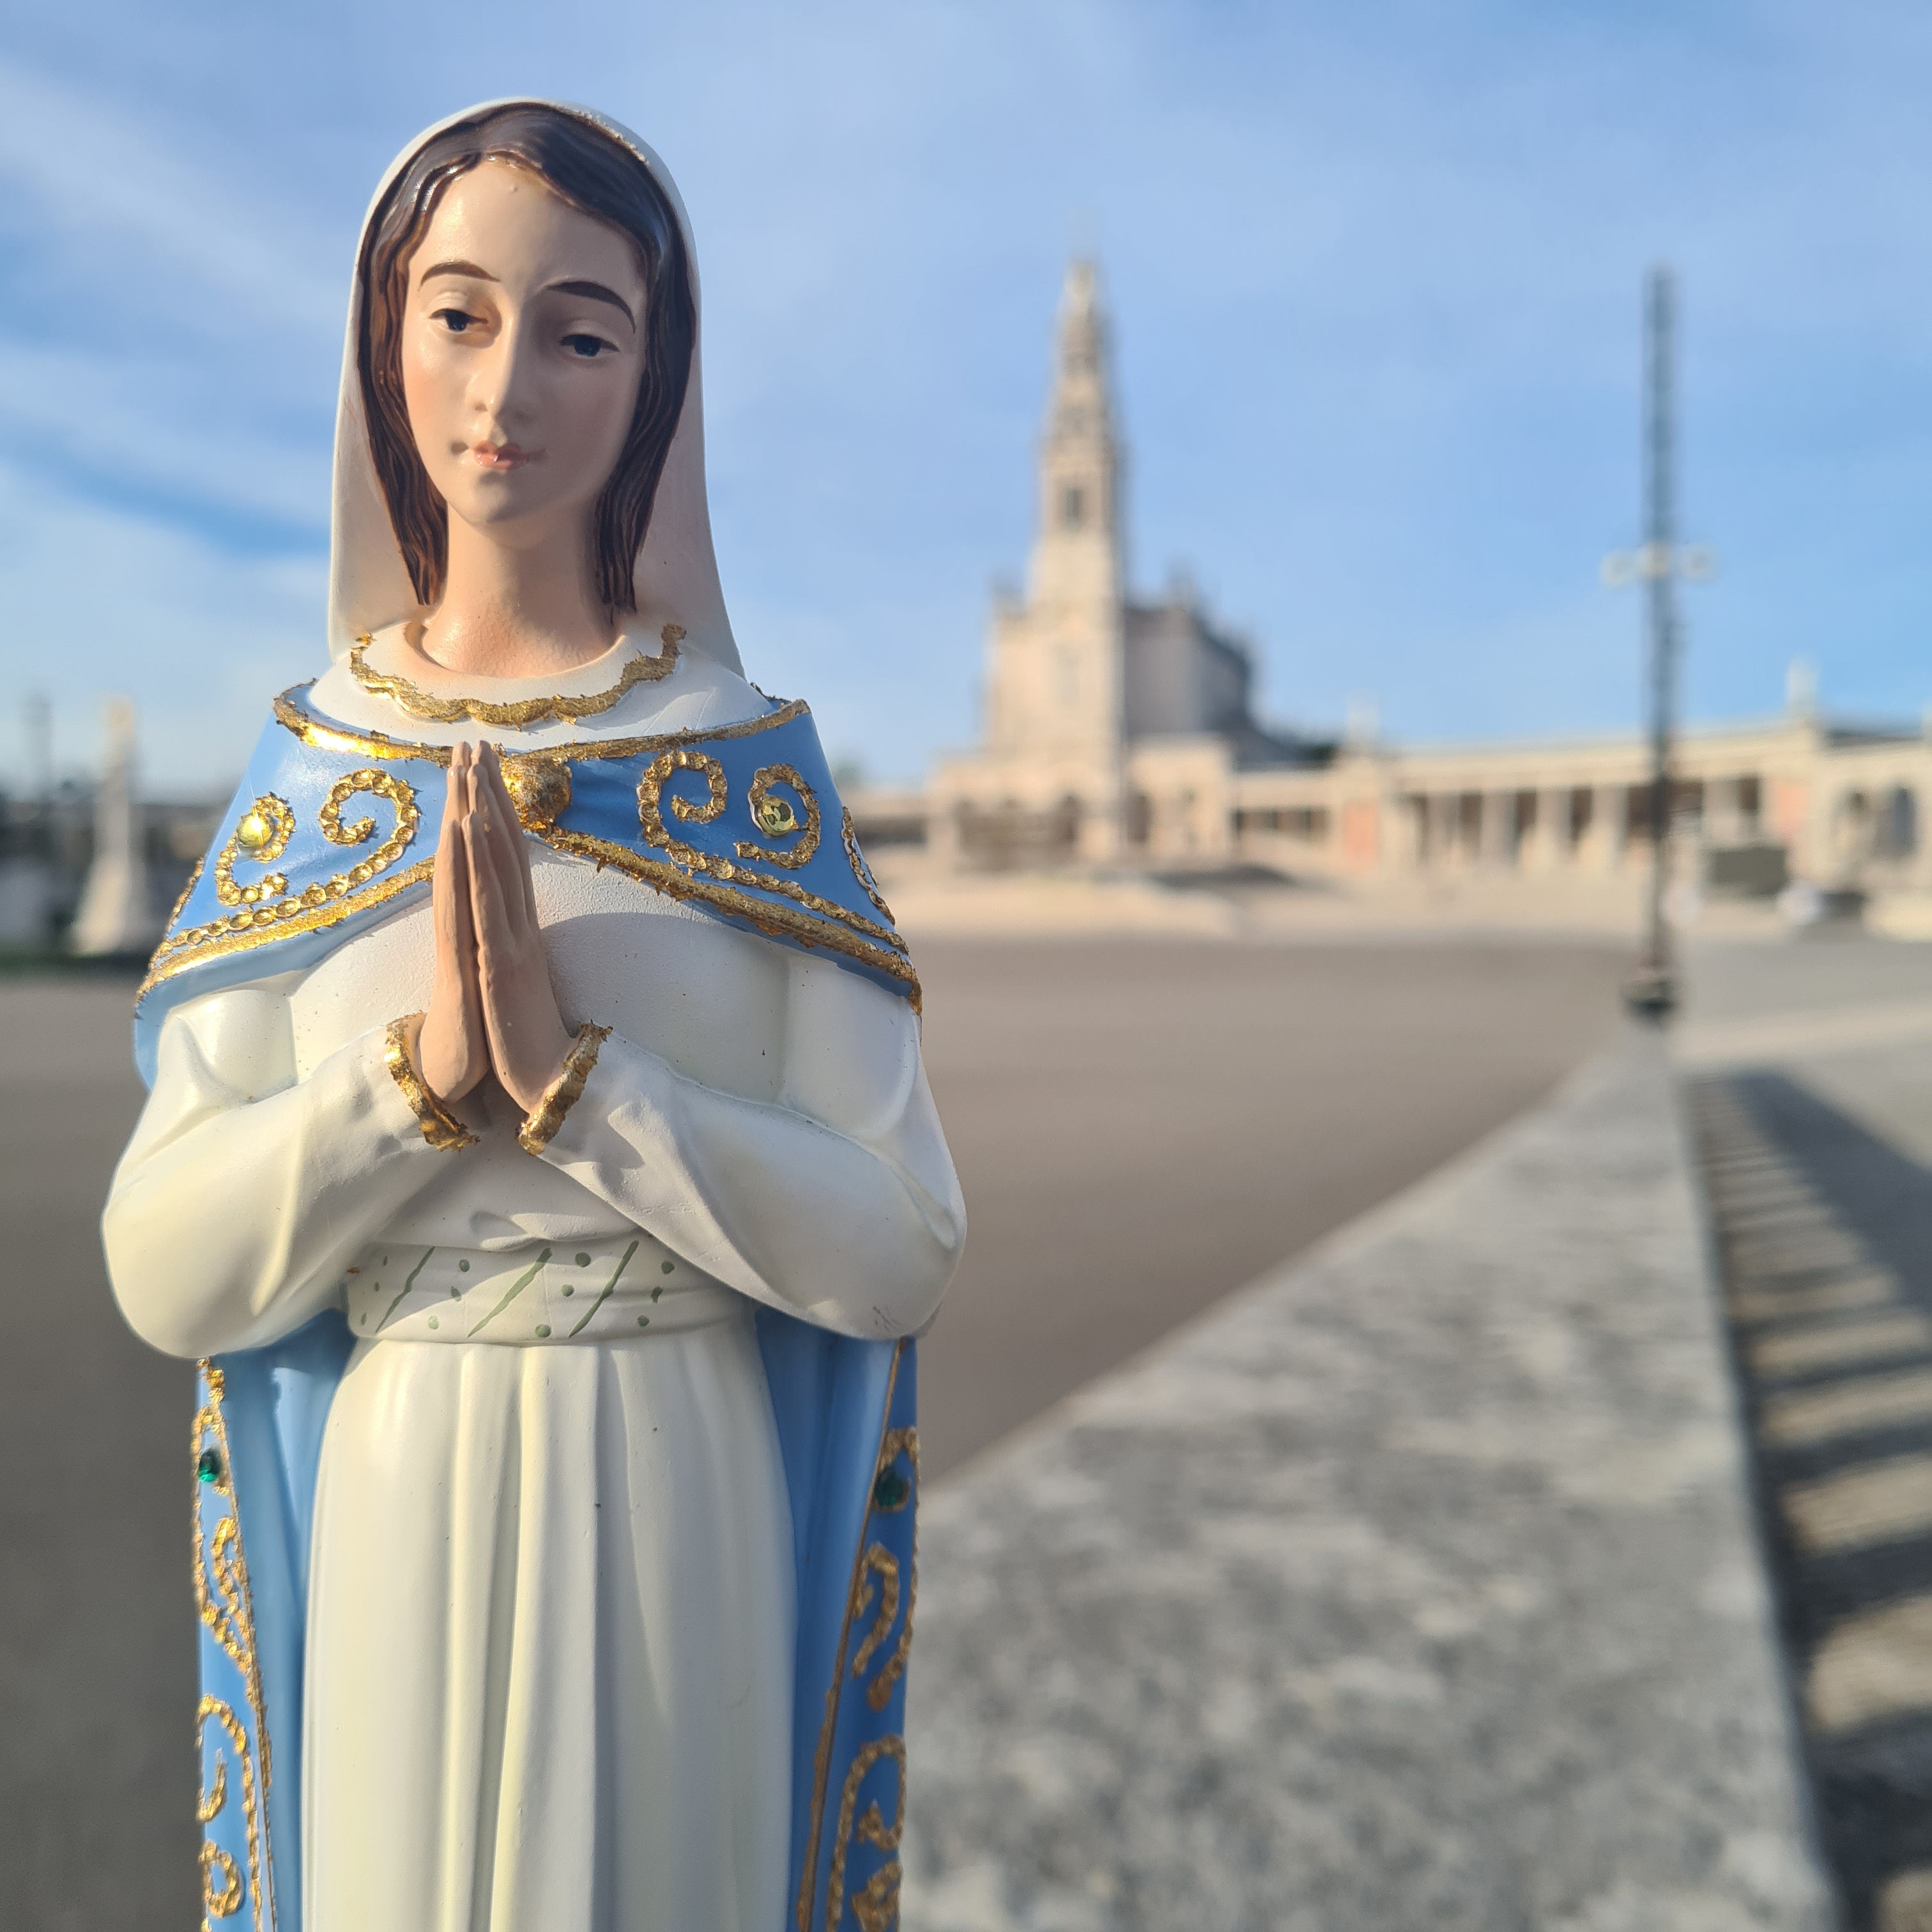 May 13th 2023 Special Edition - Our Lady of Fatima